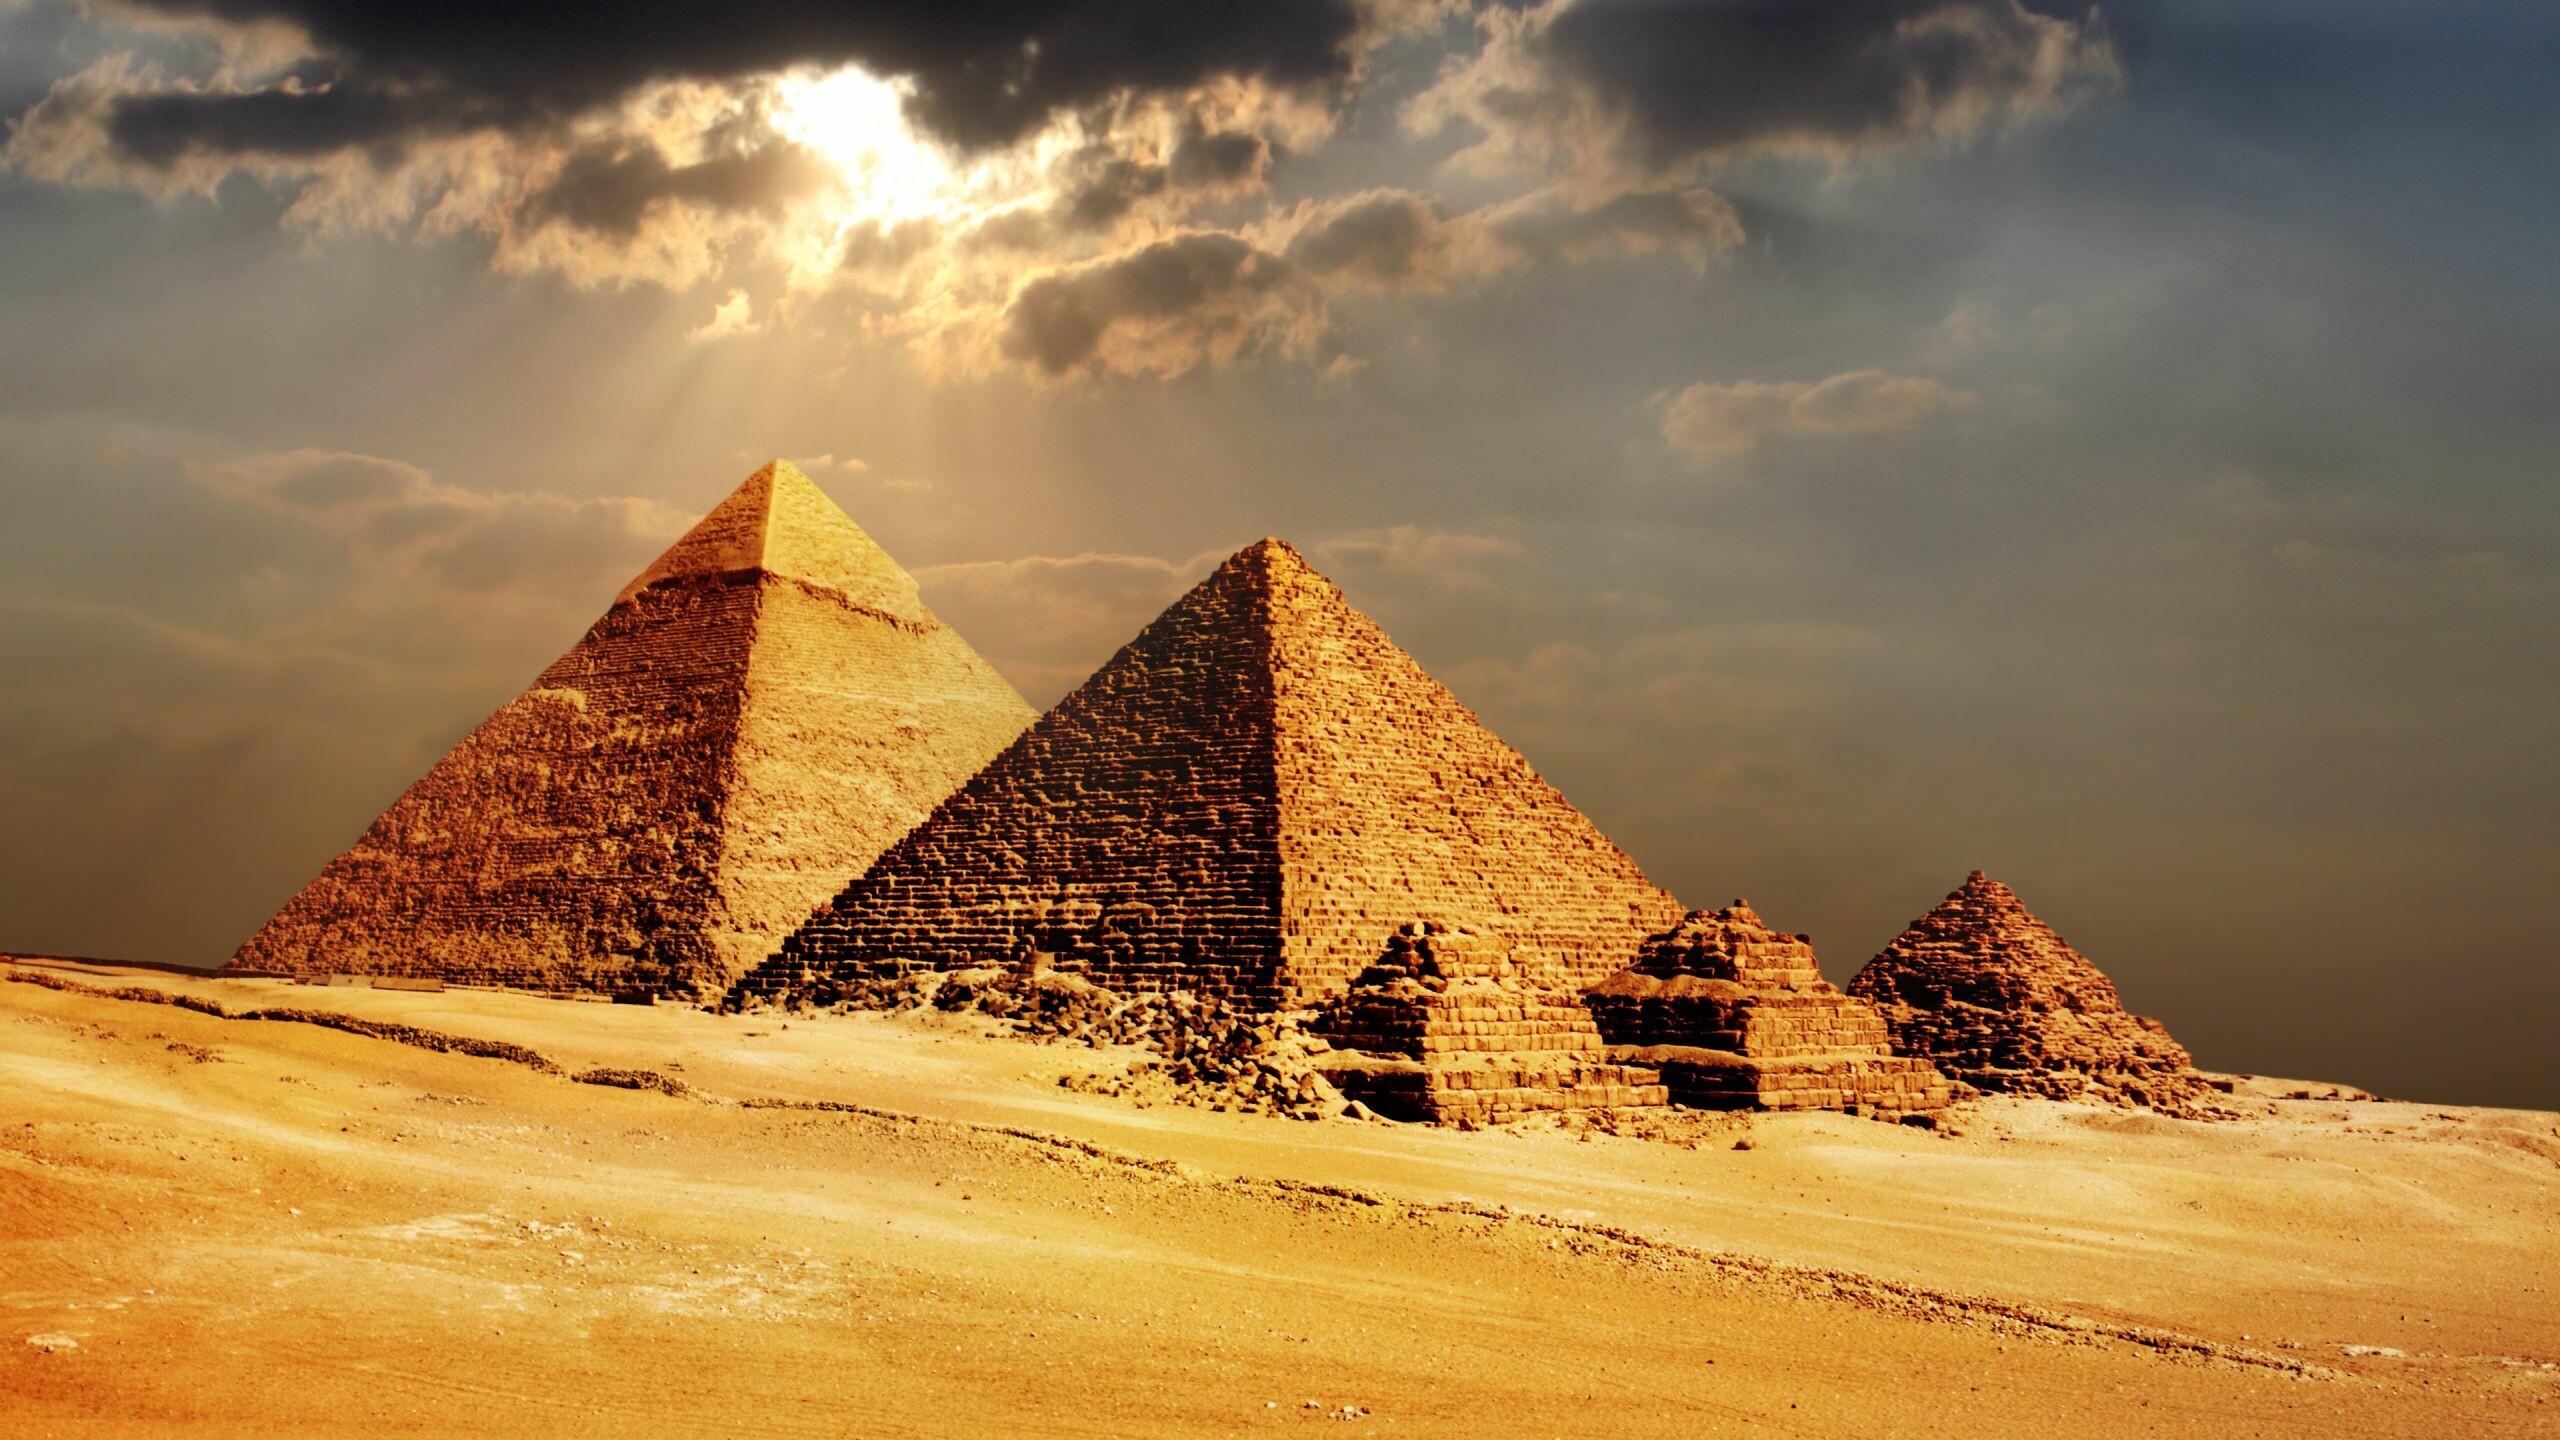 Pyramid wallpapers, WQHD resolution, Download free images, Pyramid backgrounds, 2560x1440 HD Desktop